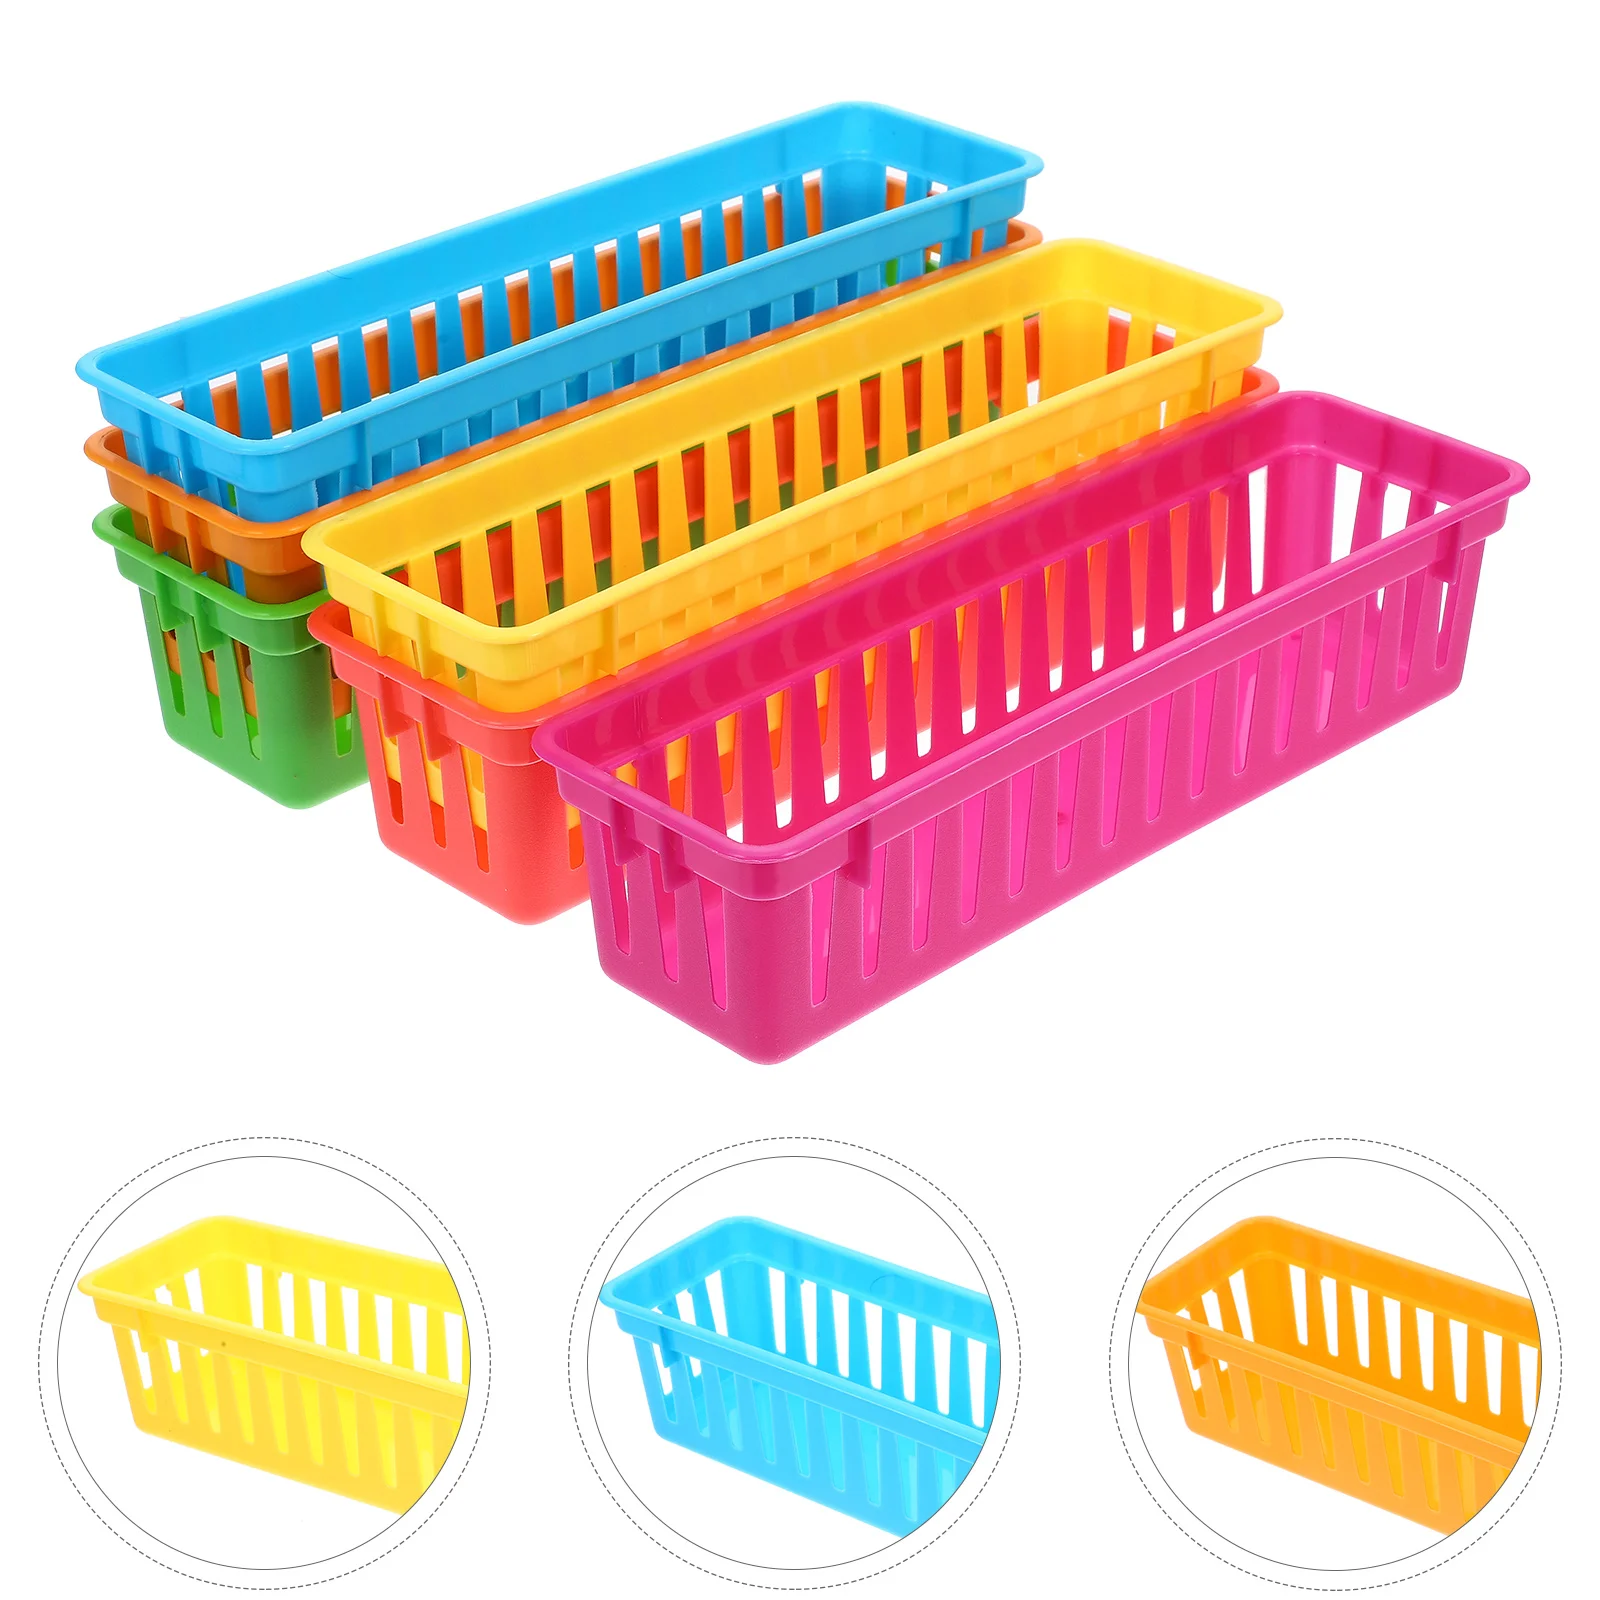 

6 Pcs Plastic Desk Pencil Holder Stationery Basket Colorful Classroom Supplies Storage Container Containers for Tray Dispenser